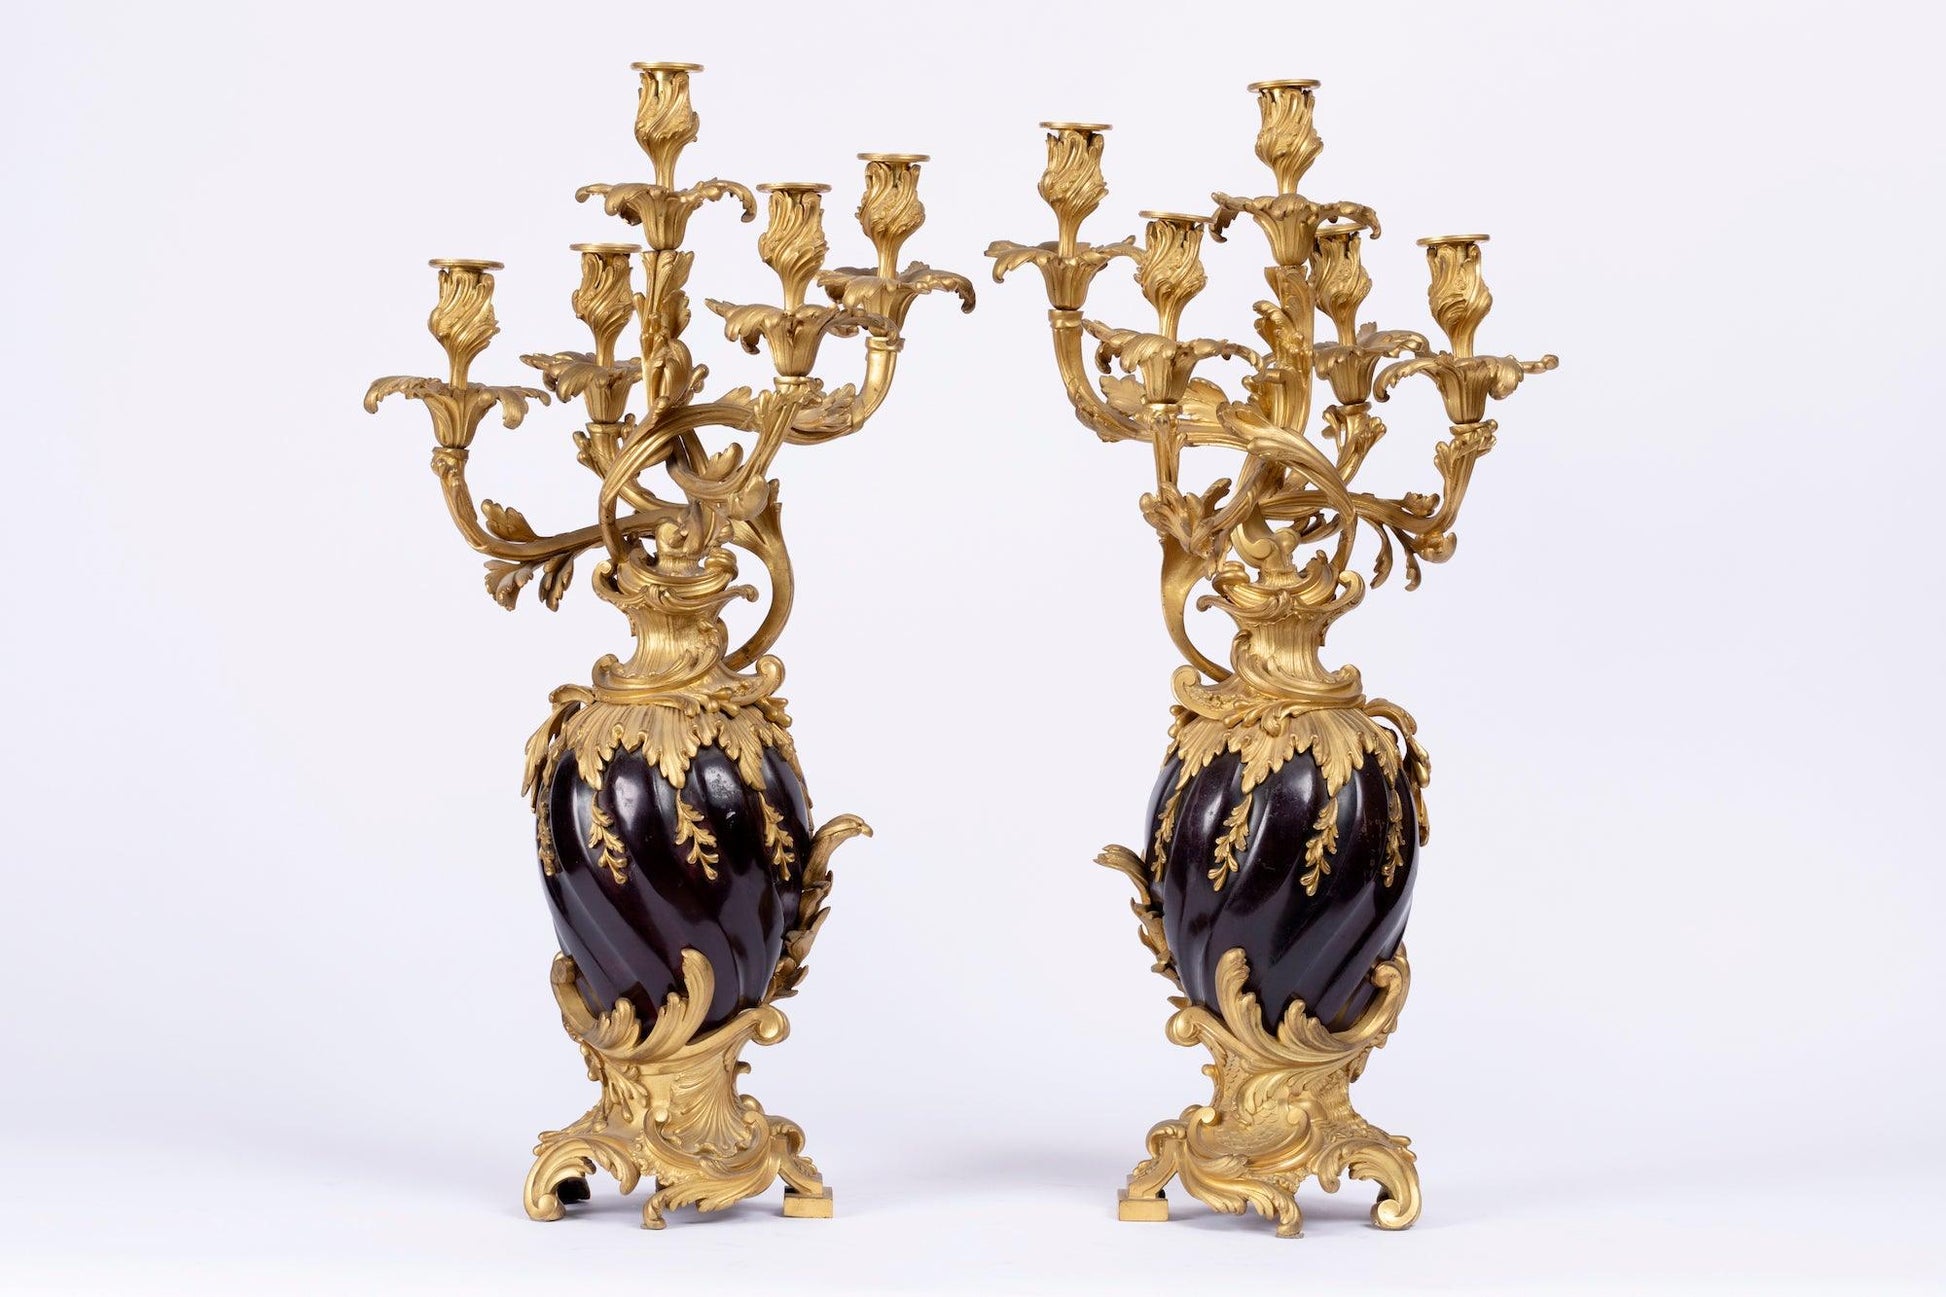 A CHARMING AND HIGH-QUALITY PAIR OF 19TH CENTURY LOUIS XV ST. CANDELABRAS. - Galerie Rosiers